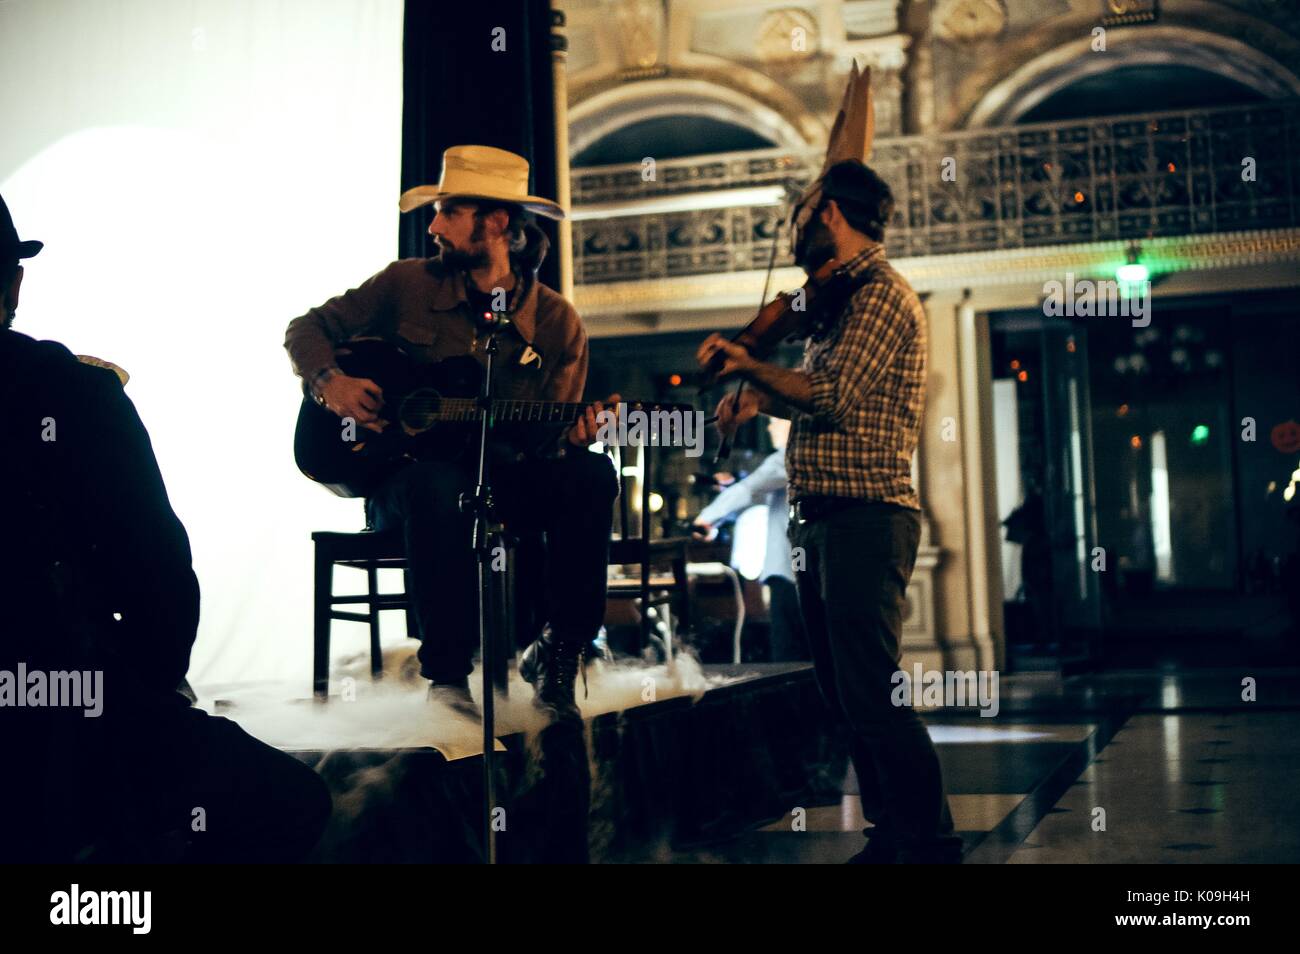 Two musicians are by a stage, on Halloween at Johns Hopkins University's George Peabody Library, one man is sitting on a chair on the stage with a guitar in his lap and the other man is holding a violin, 2015. Courtesy Eric Chen. Stock Photo